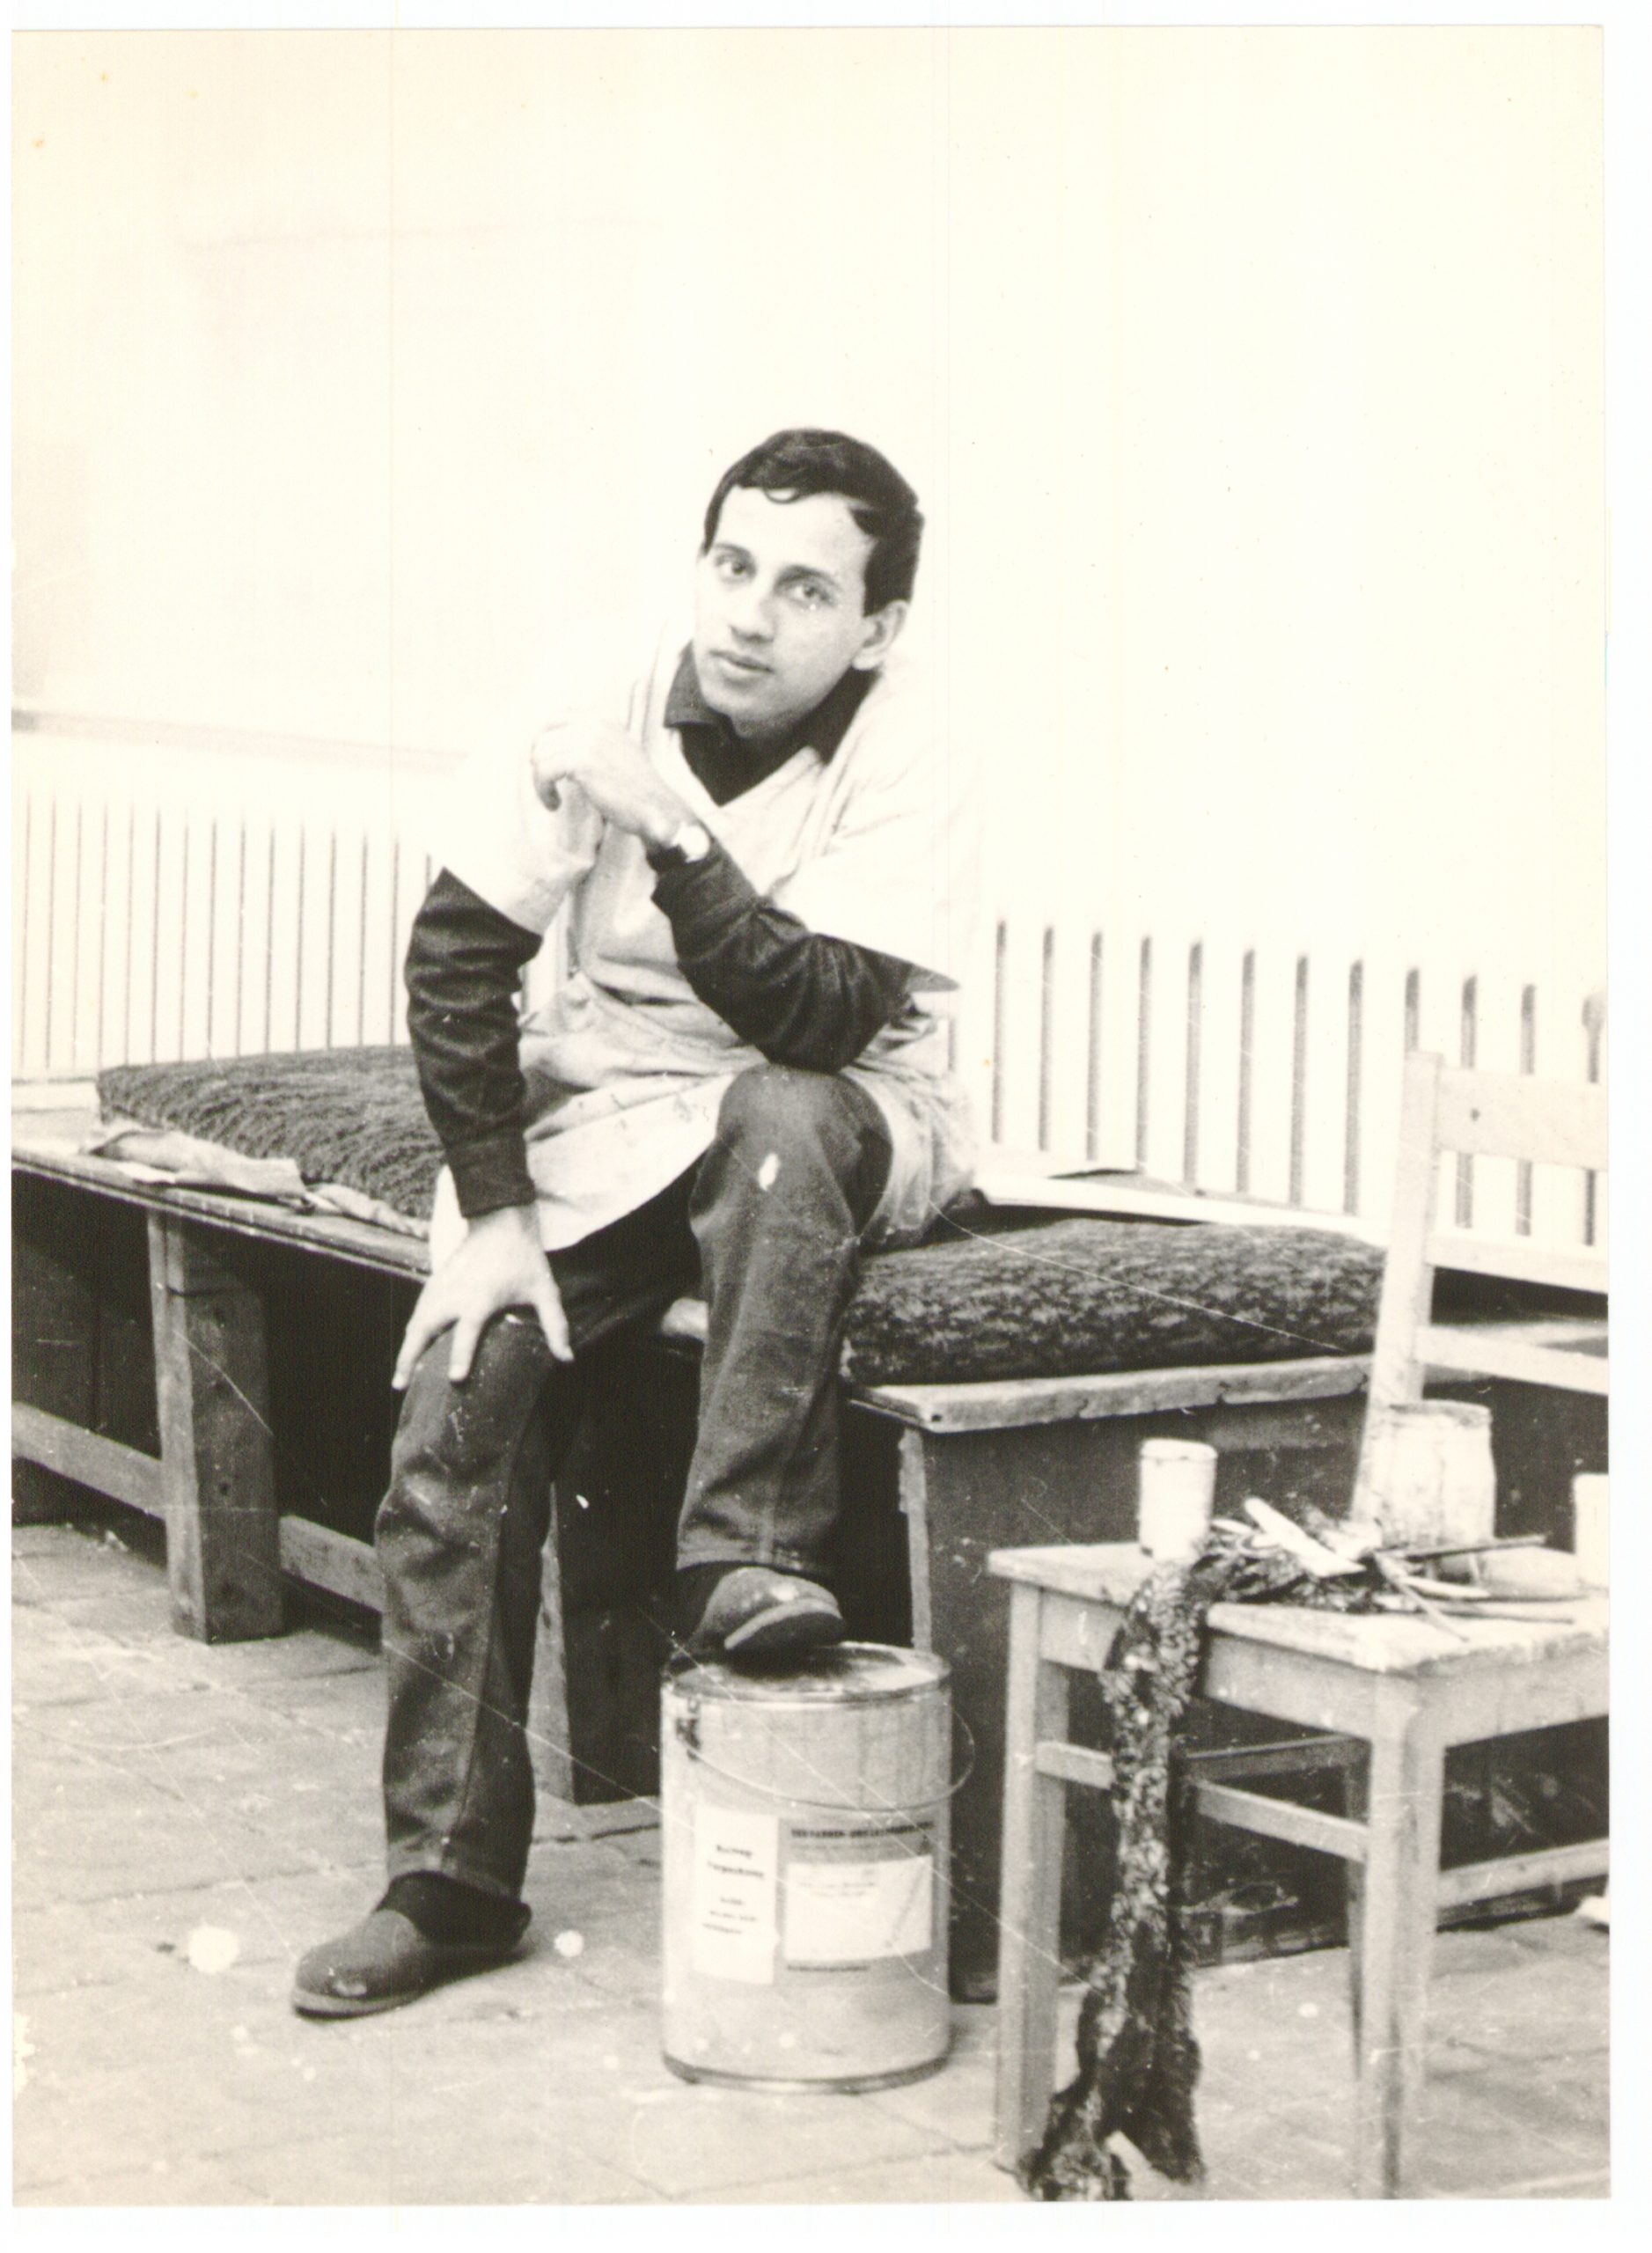 Abed Abdi at the Dresden Academy of Art, 1969